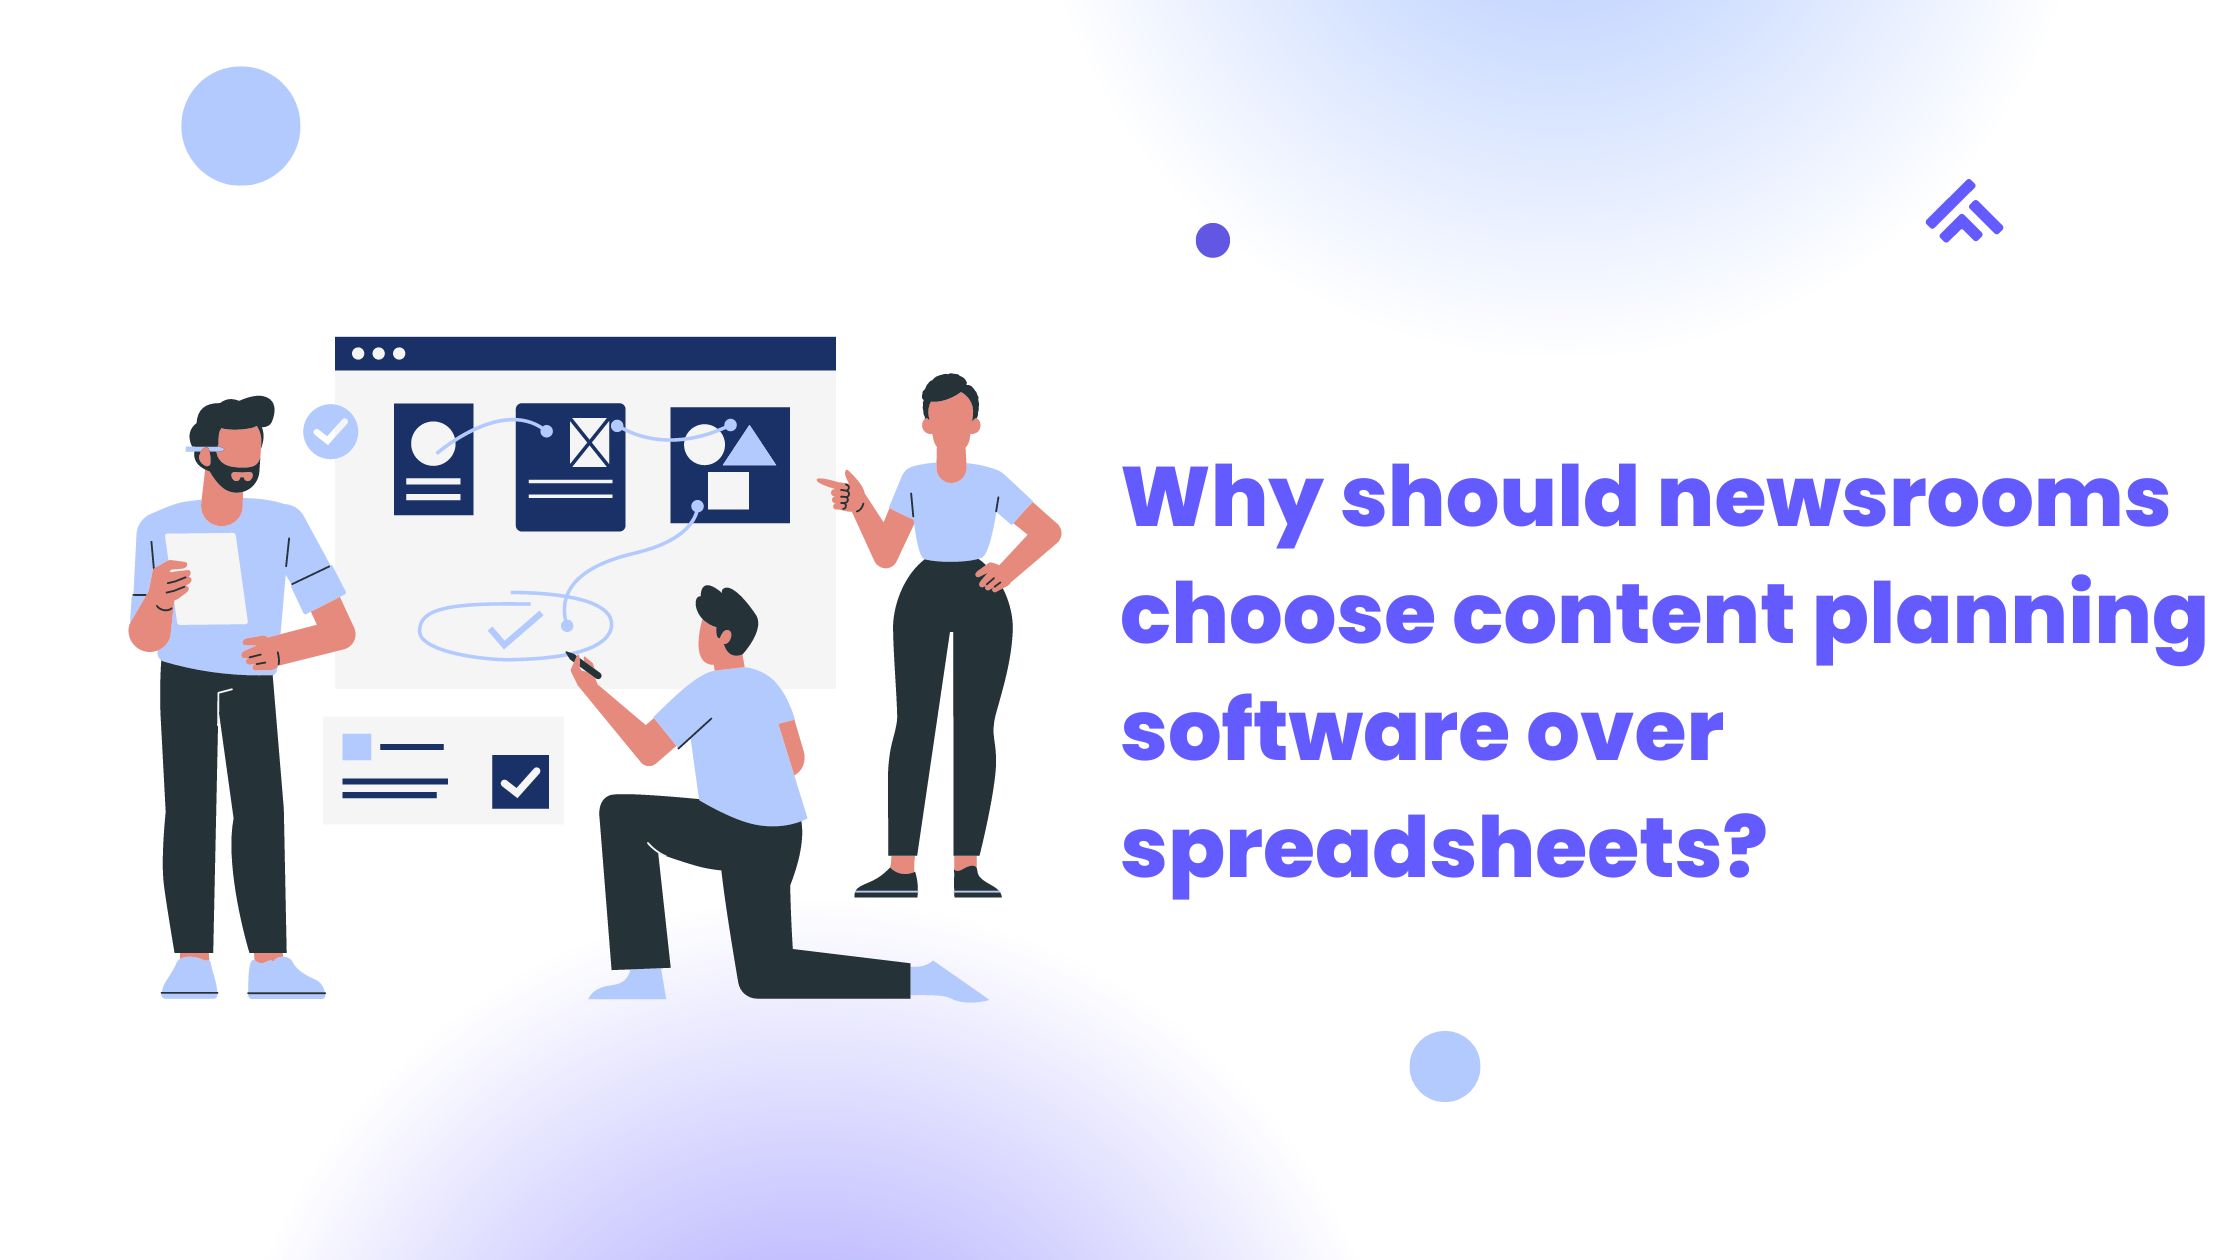 Why should newsrooms choose content planning software over spreadsheets? 